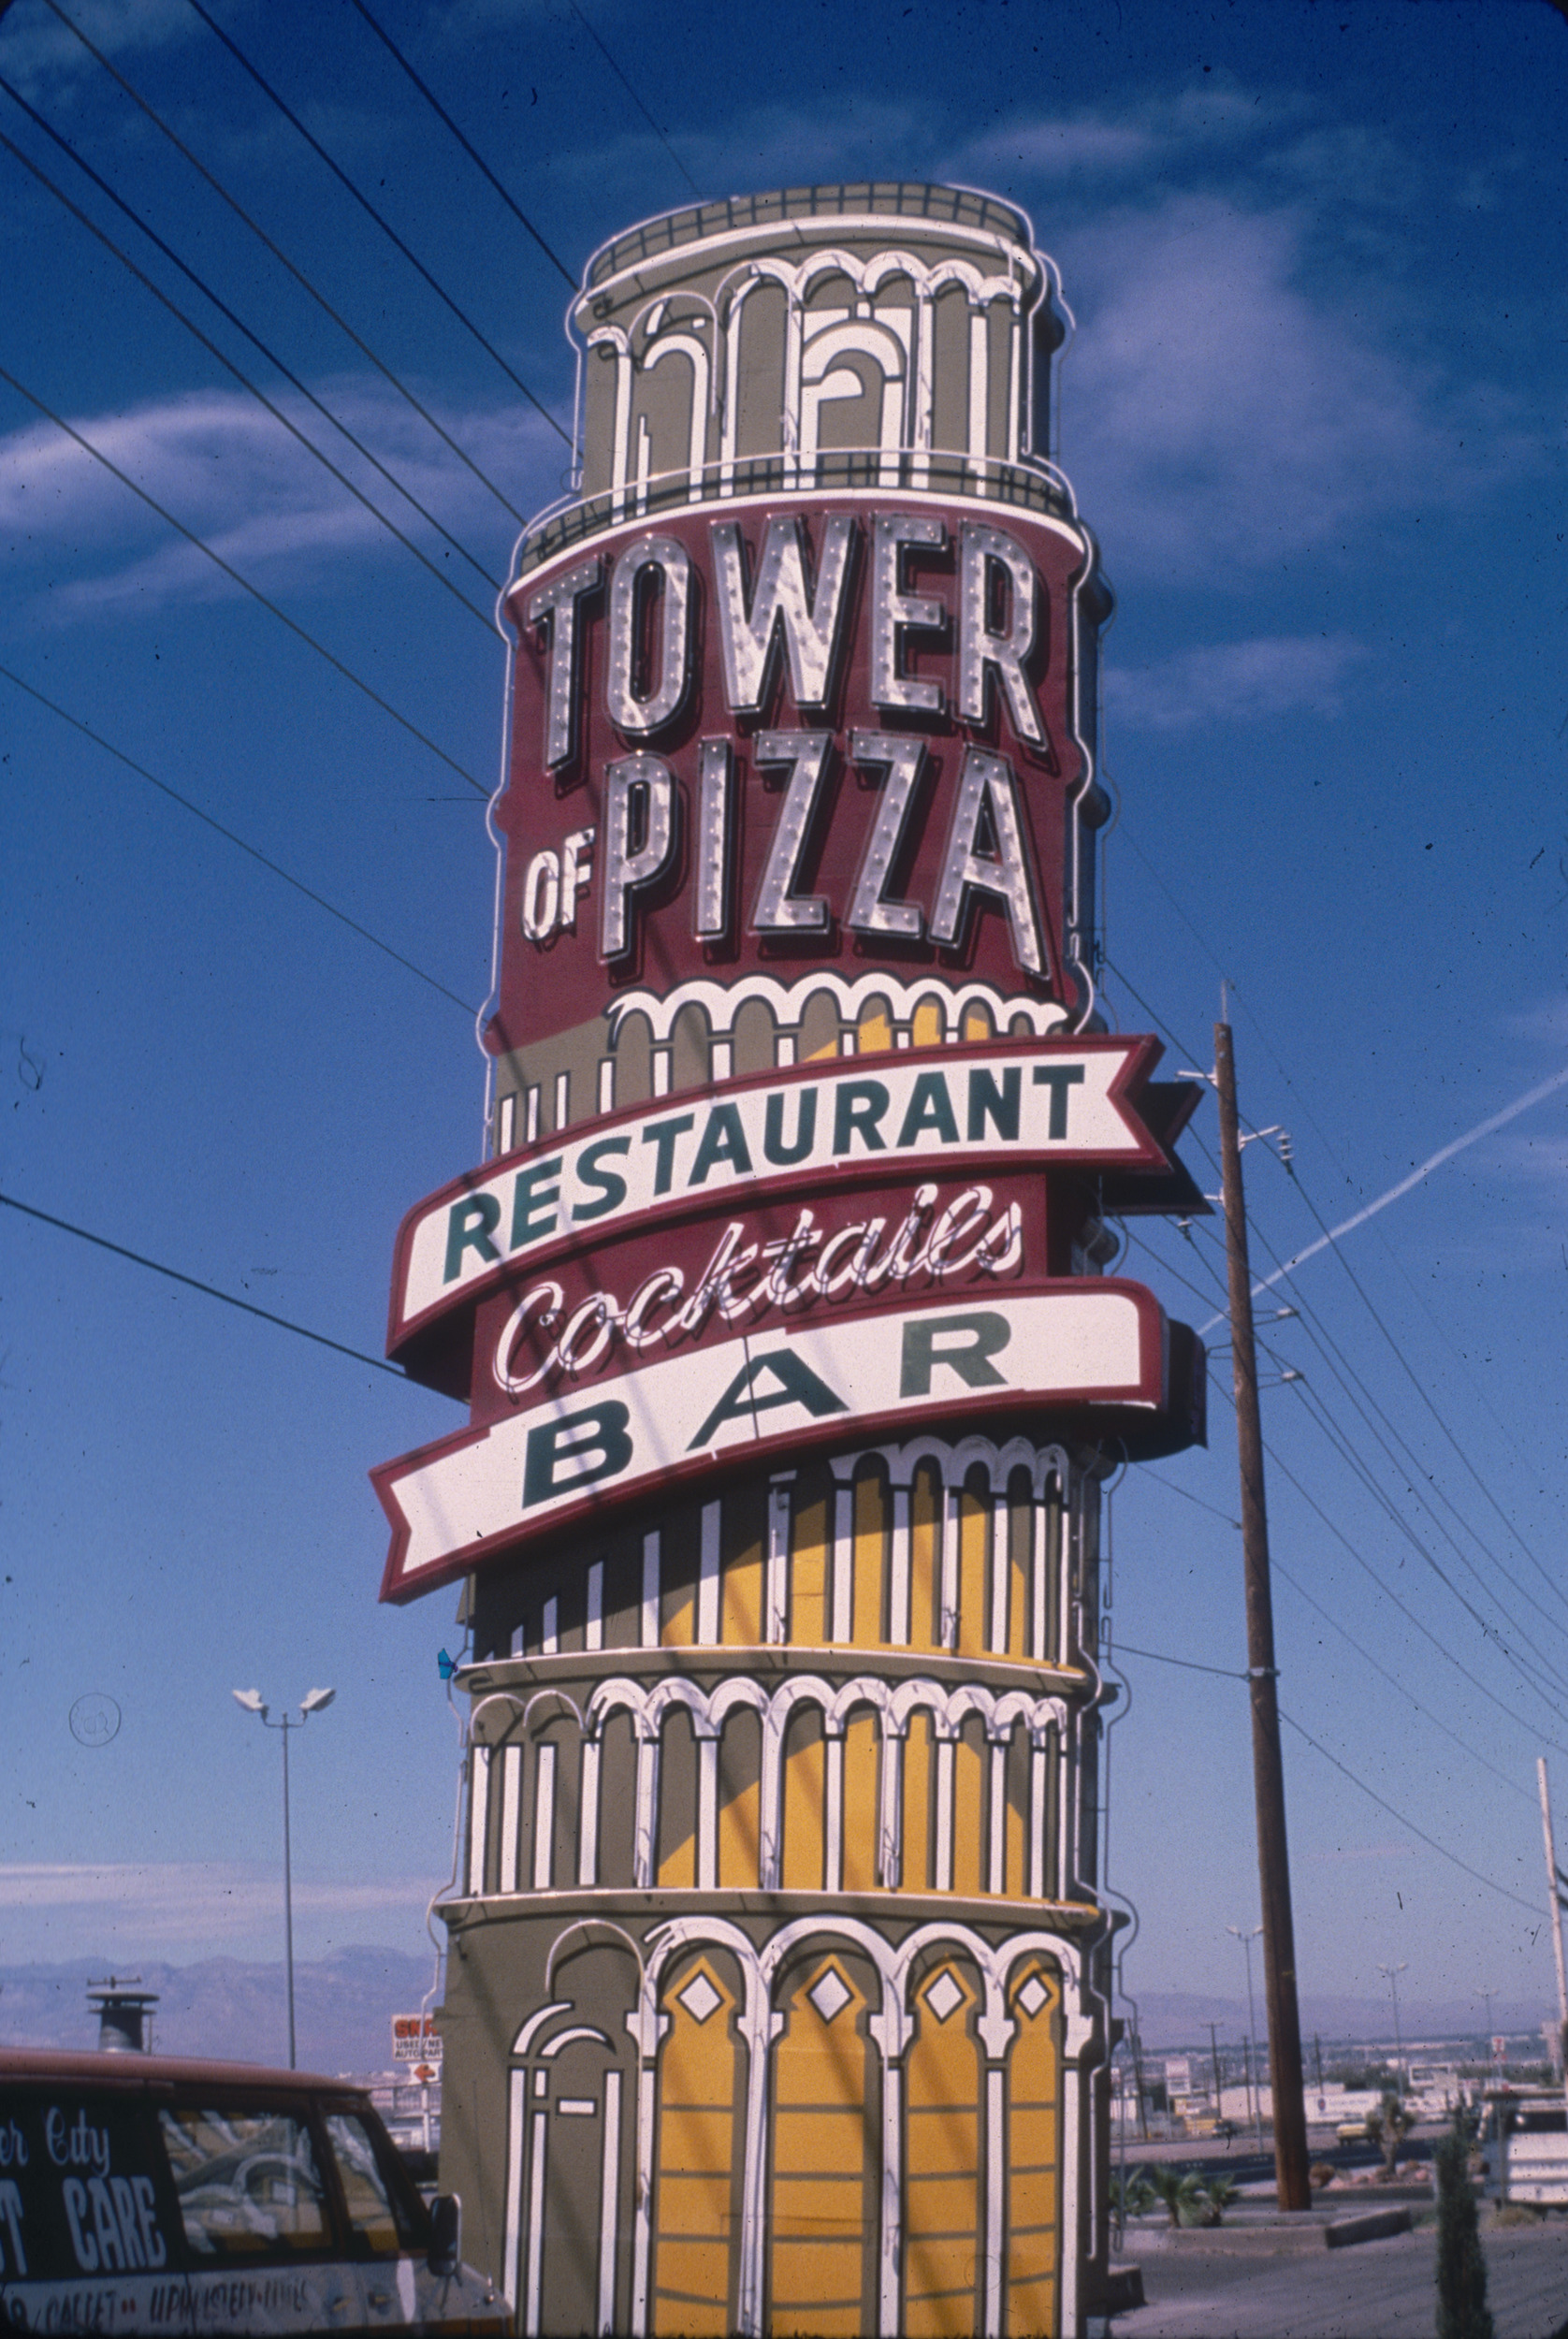 Slide of the Tower of Pizza, Nevada, 1986